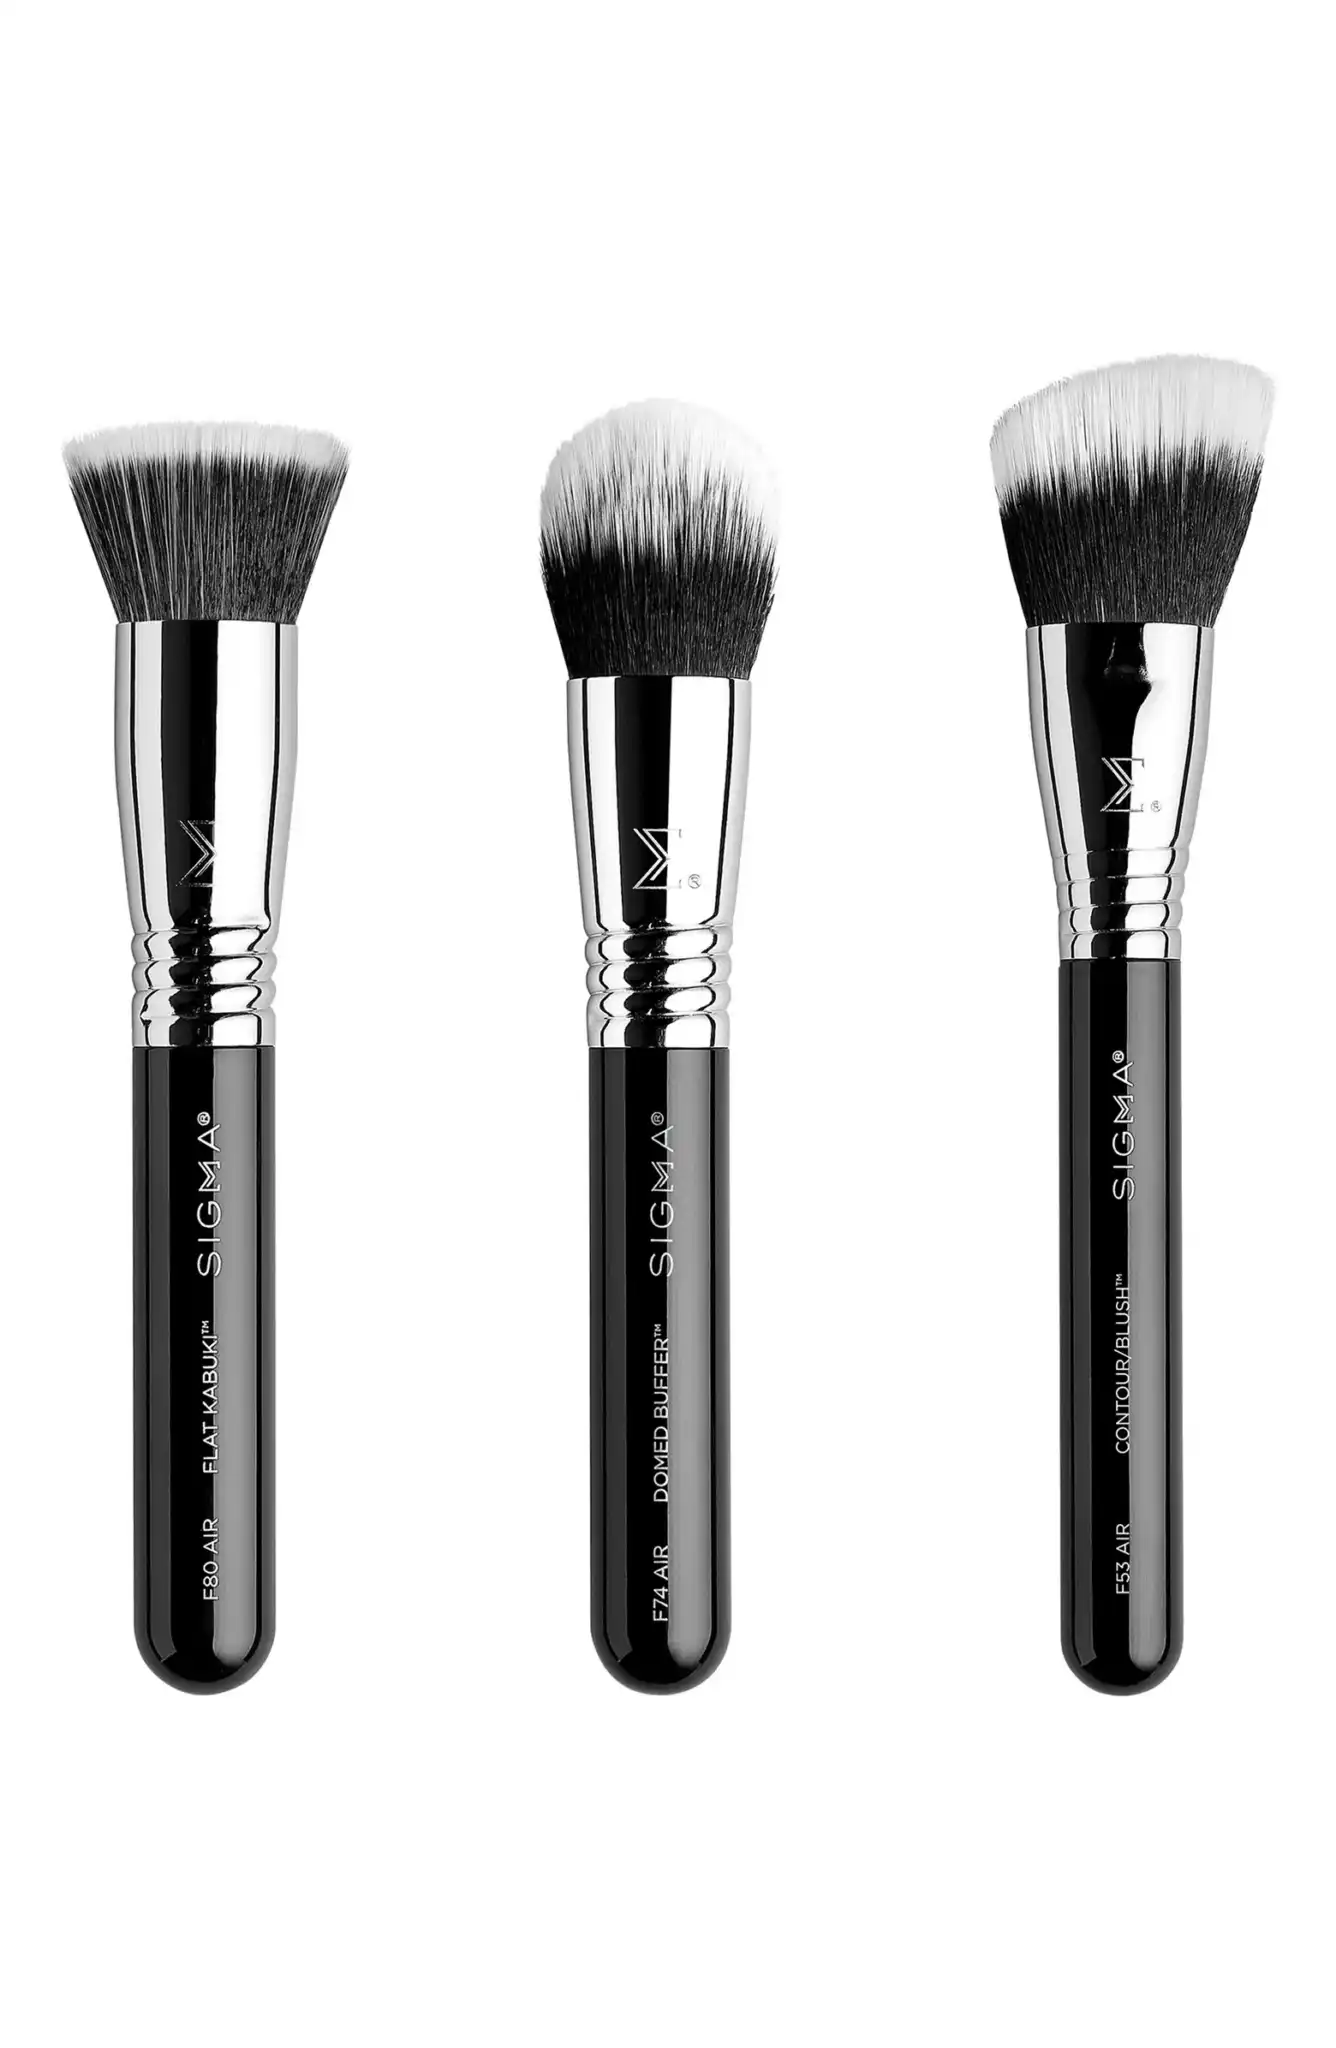 All About Face Makeup Brush Trio Set